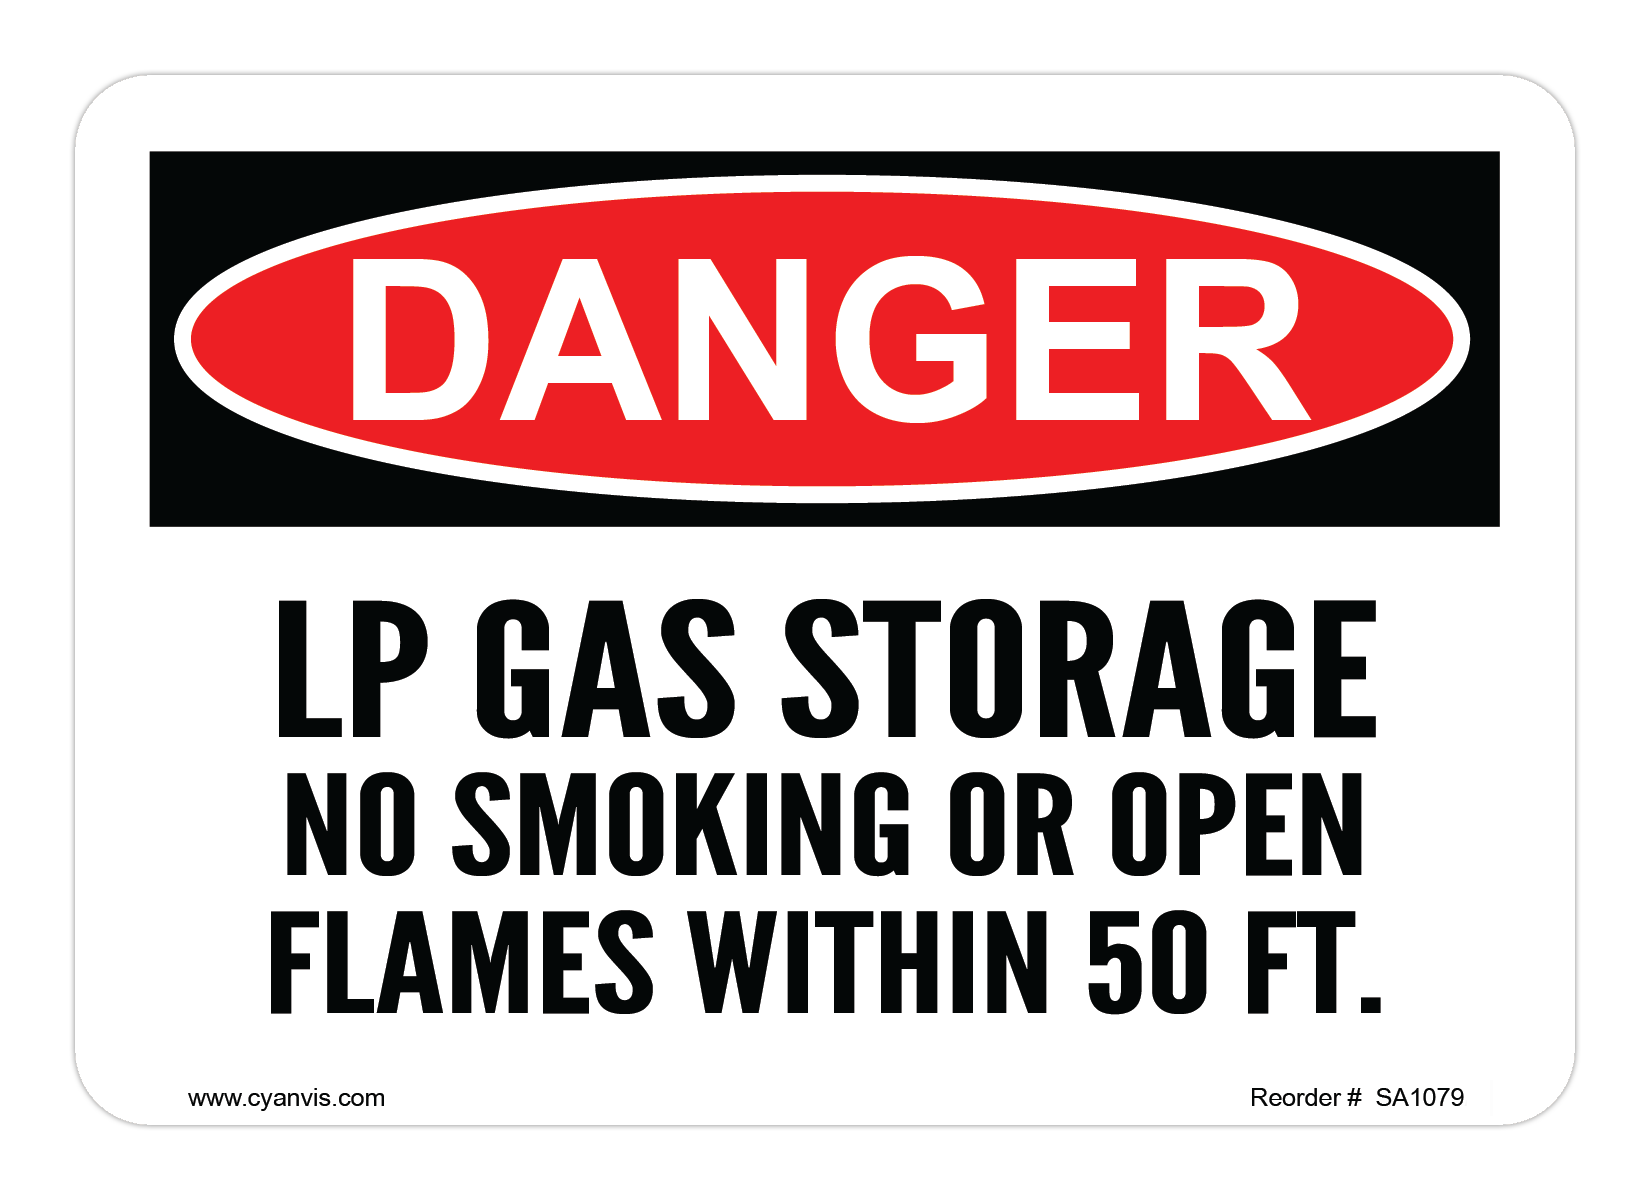 Safety Sign: Danger - LP GAS STORAGE NO SMOKING OR OPEN FLAMES WITHIN 50 FT. - CYANvisuals